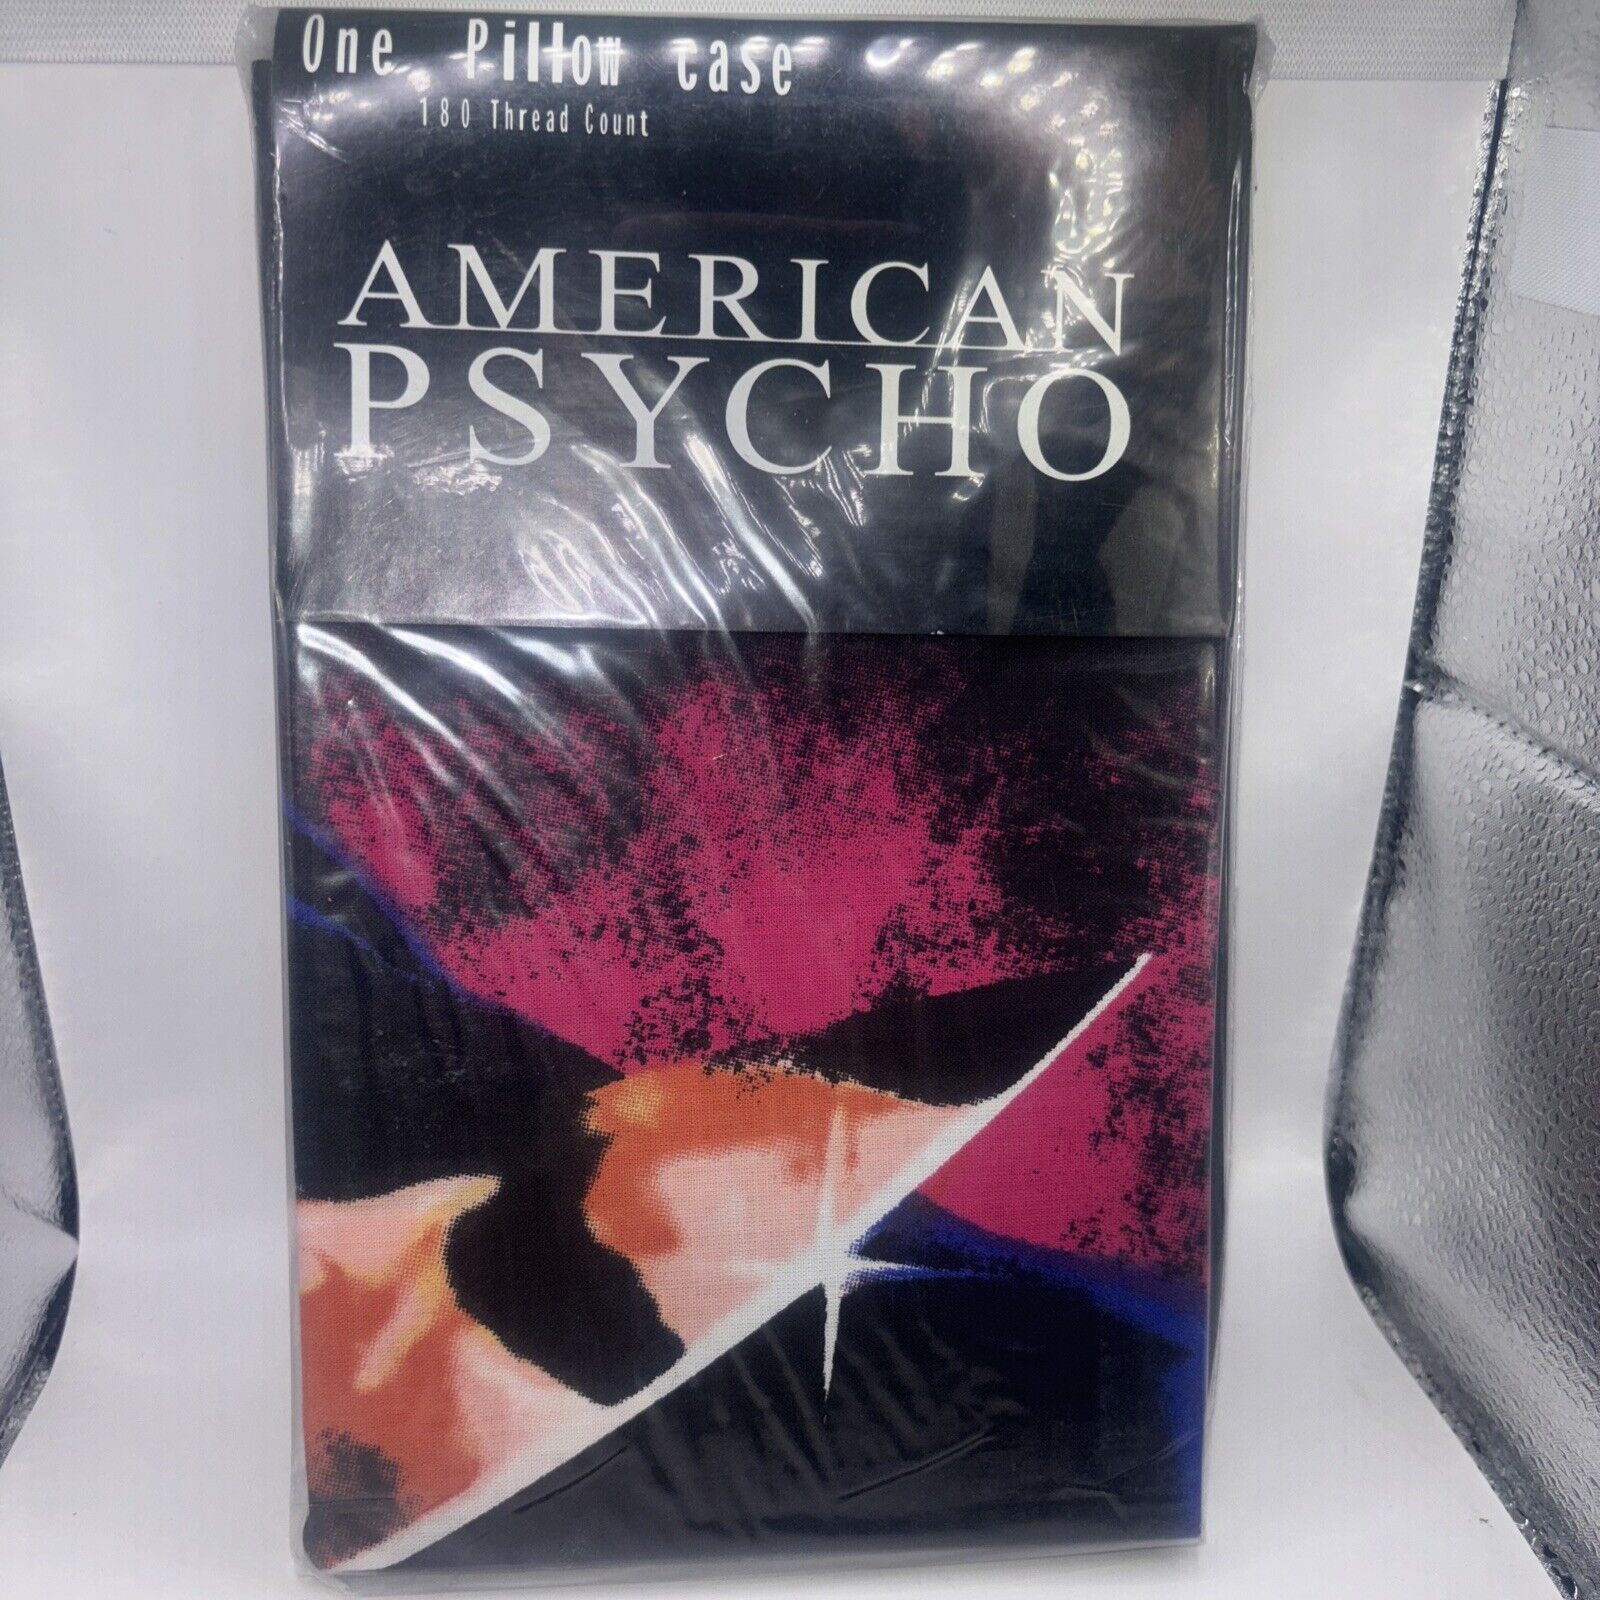 2005 Neca “American Psycho” Pillow Case 180 Thread Count New For 20 X 26” Pillow